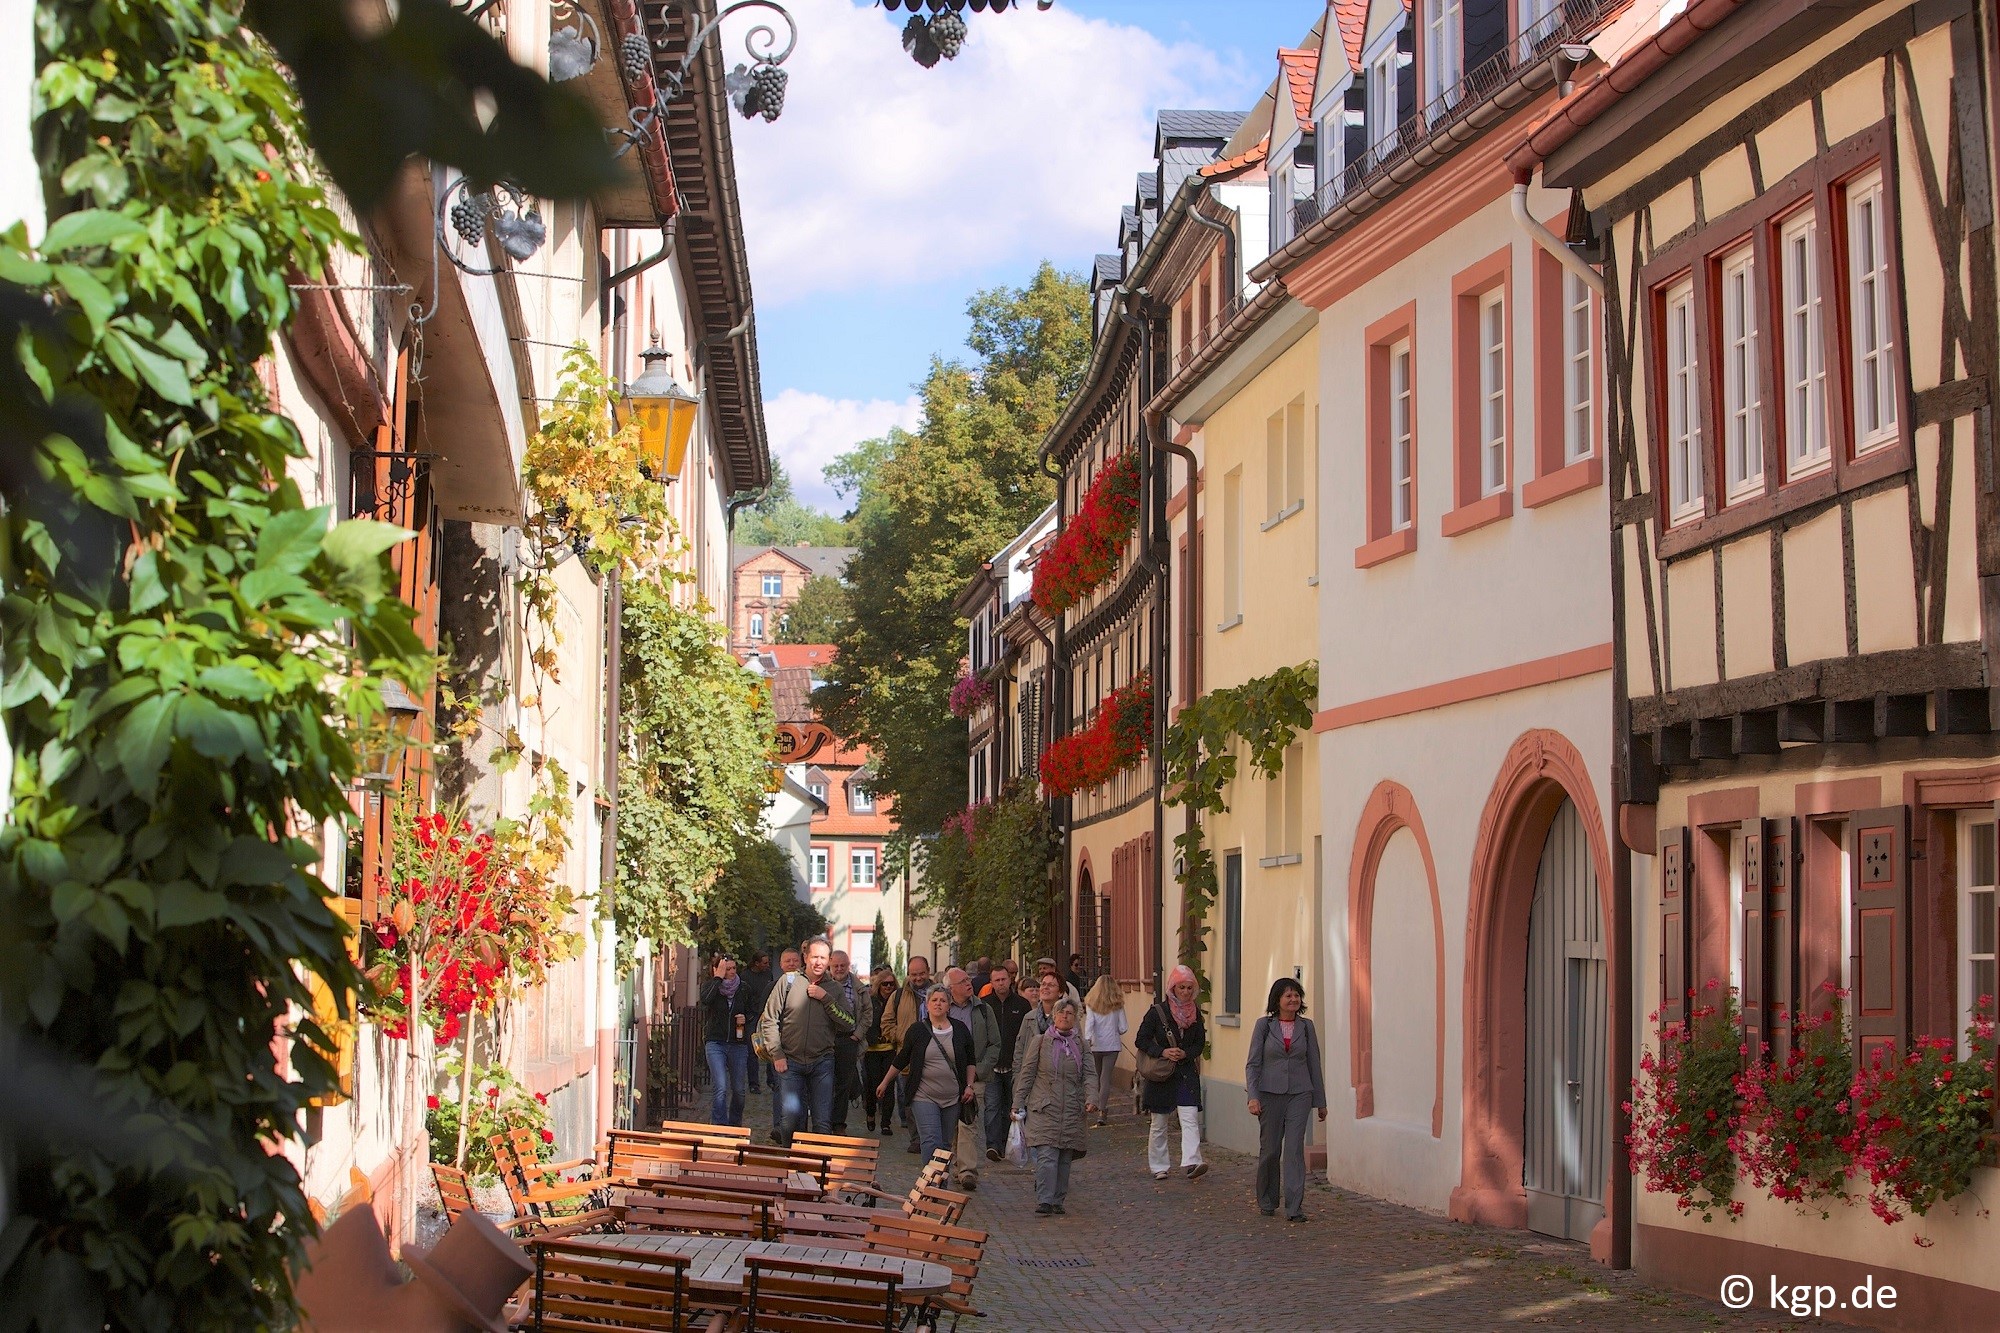 Public guided walking tour of the historic Old Town